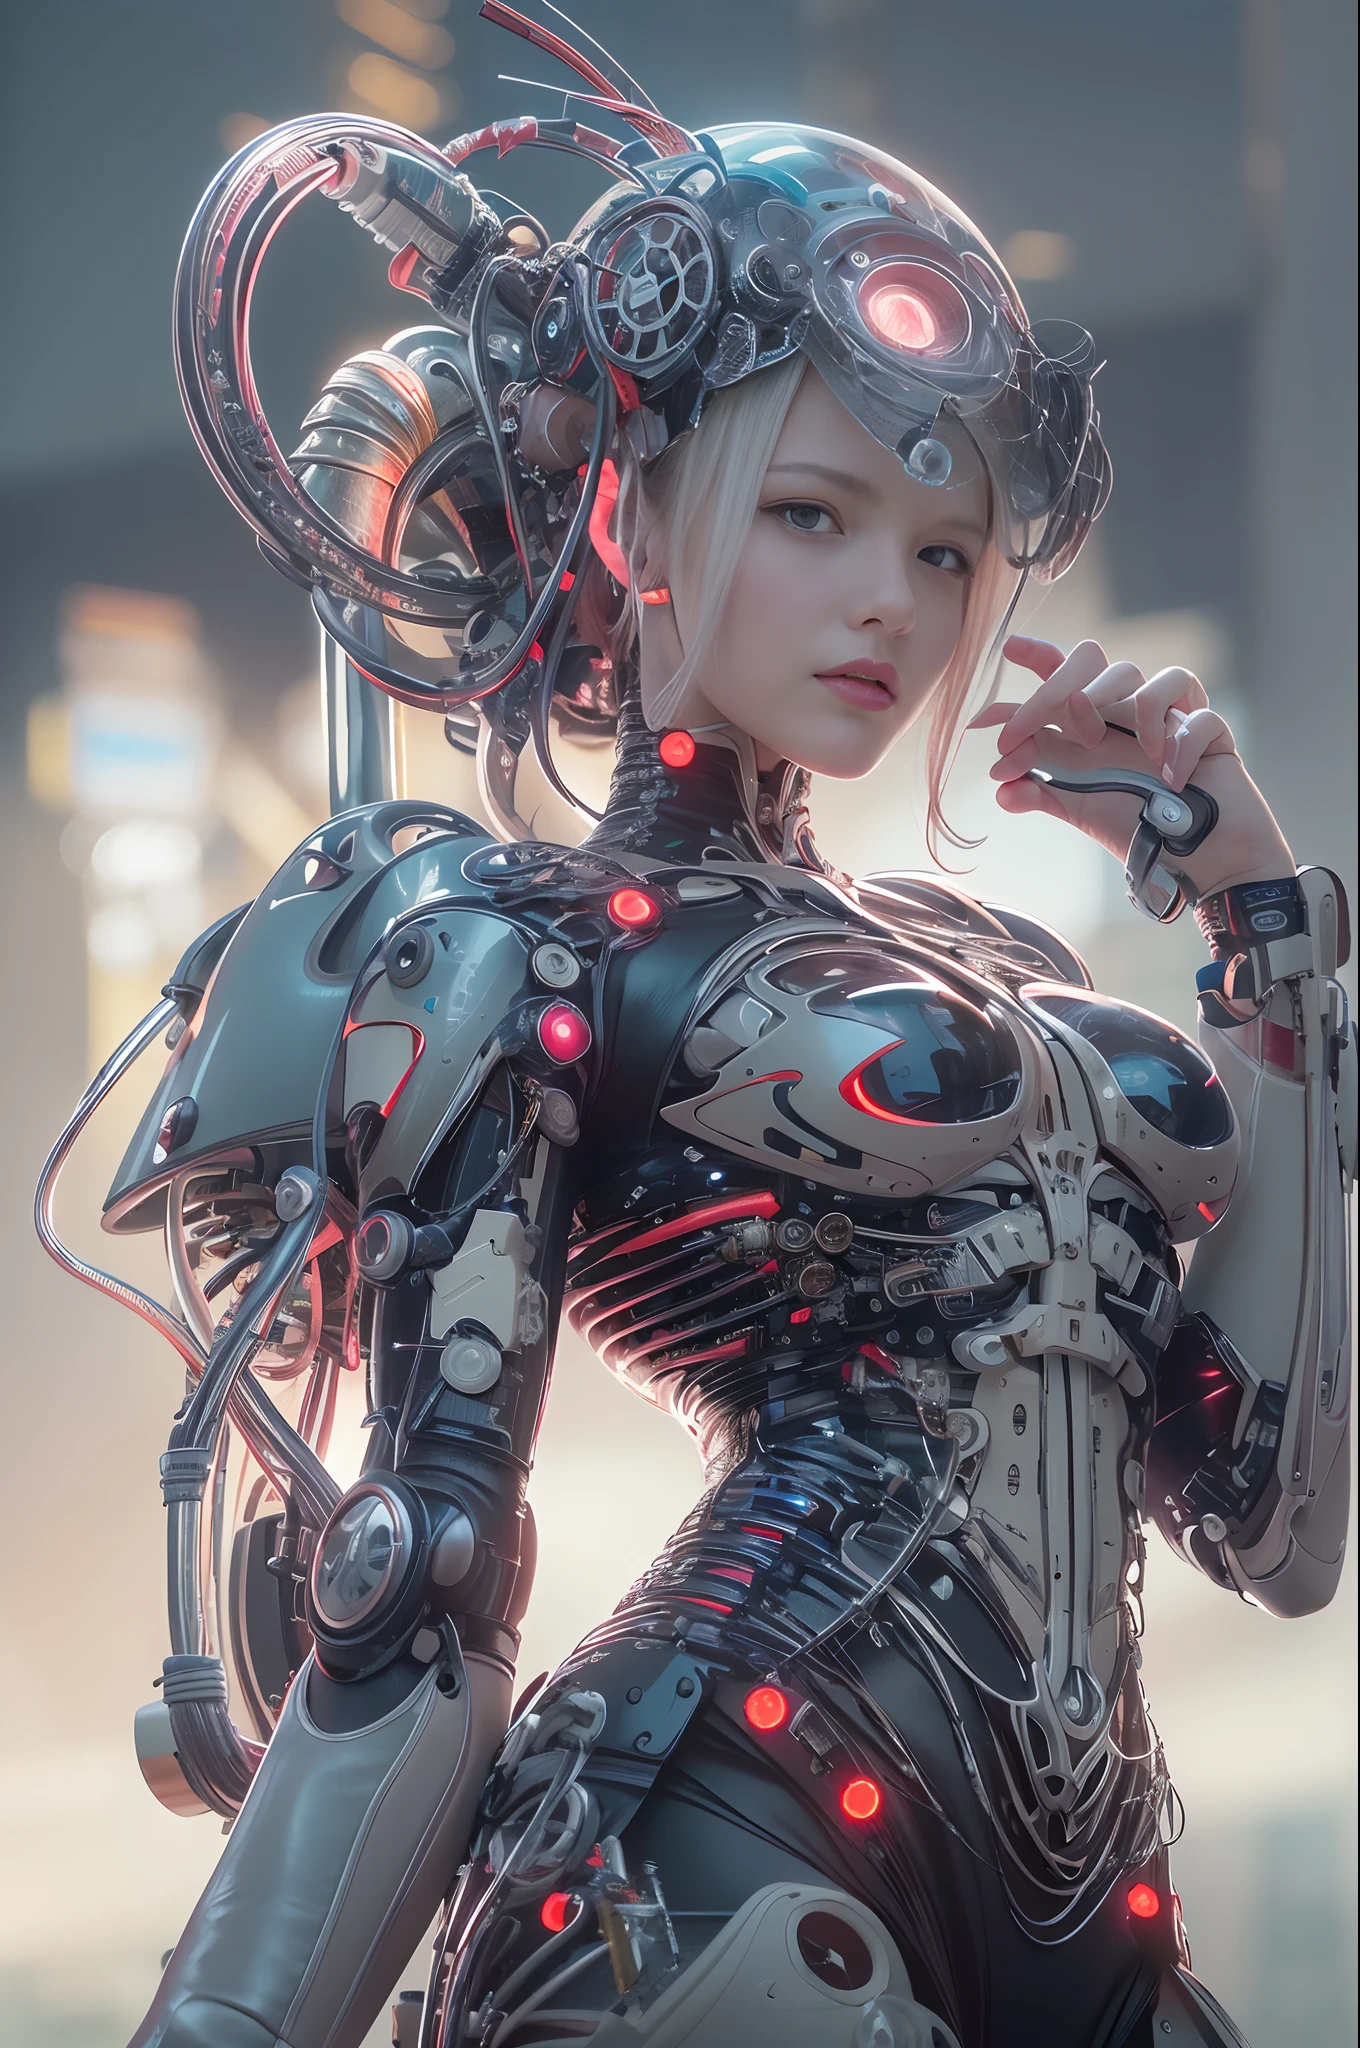 de la más alta calidad, Mesa, UltRa High Resolution, ((PhotoRealistic: 1.4), foto en bruto, 1 CybeRpunk AndRoid GiRl, Piel brillante, (supeR Realistic details)), extremidades mecánicas, Tubes connected to mechanical paRts, Mechanical veRtebRae attached to the spine, Mechanical ceRvical attachment to the neck, WiRes and cables connecting to the head, evangelion, ((fantasma en la concha)), Pequeña lámpara LED brillante, iluminación global, Sombras profundas, Octane RendeRing, 8k, ultRashaRp, Metal, IntRicate decoRation details, BaRoque style details, high intRicate detailed, luz realista, TRends in CG, Facing the cameRa, detalles de neón, (andRoid factoRy on backgRound), ARt by H.R. GigeR and Alphonse Mucha.